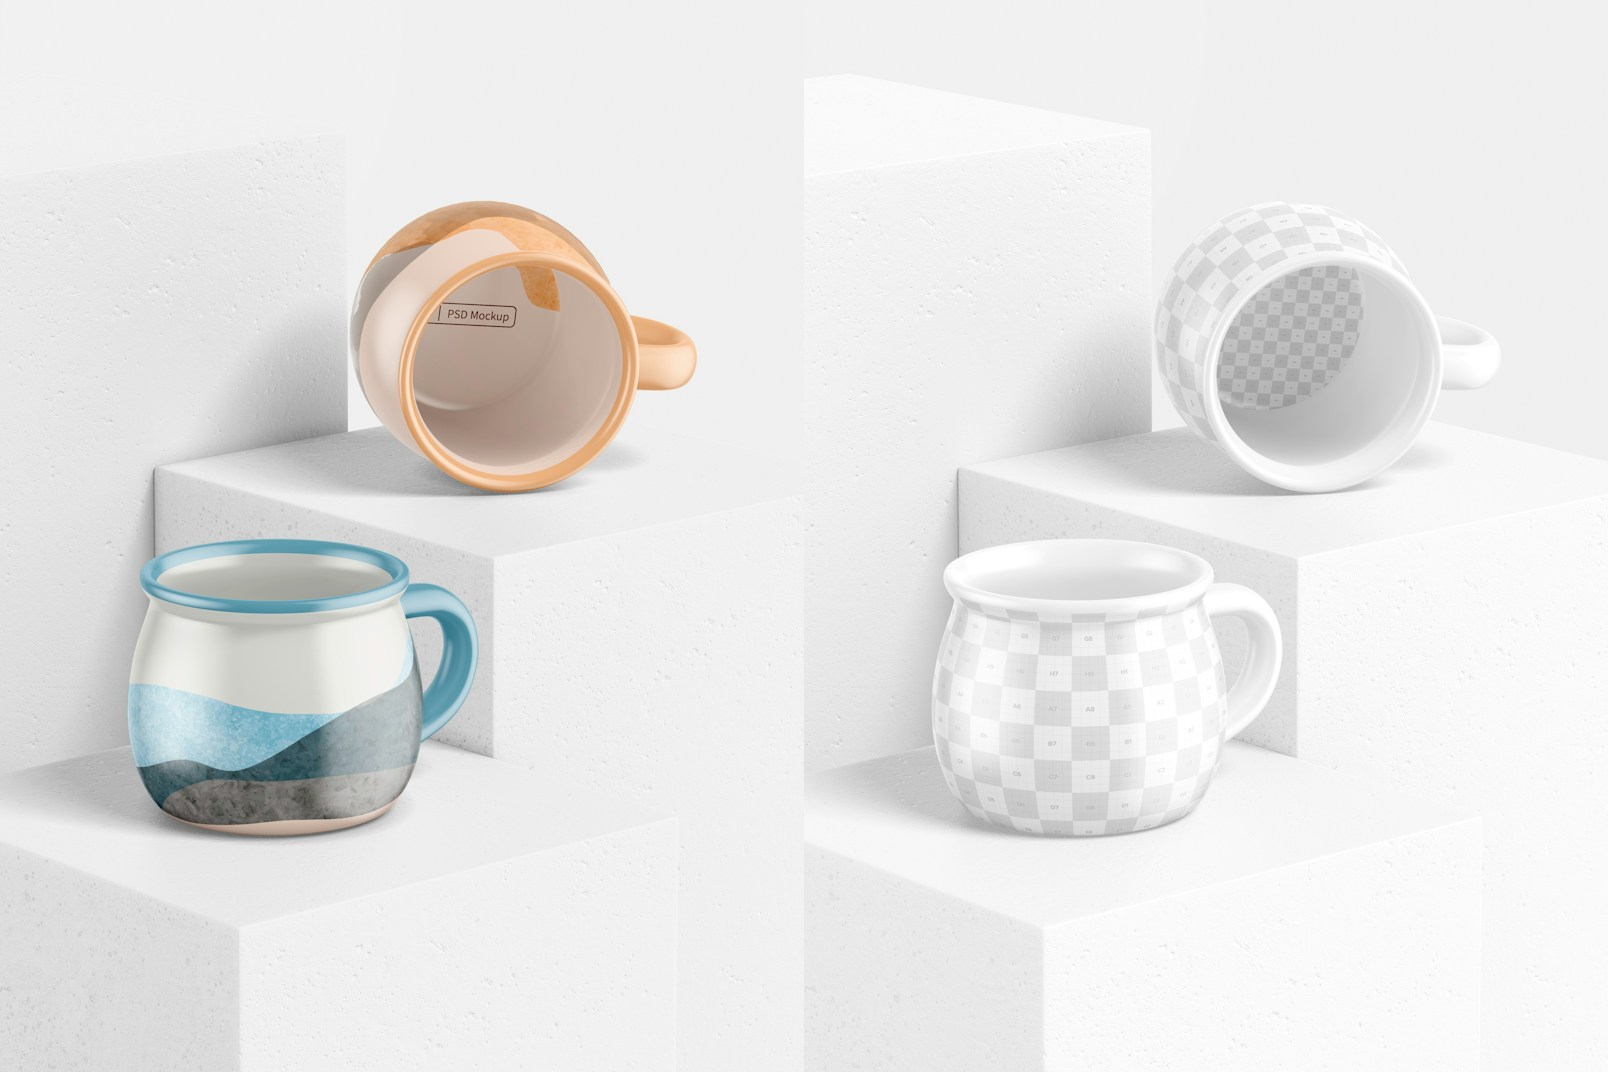 Round Enamel Cup Mockup, Standing and Dropped